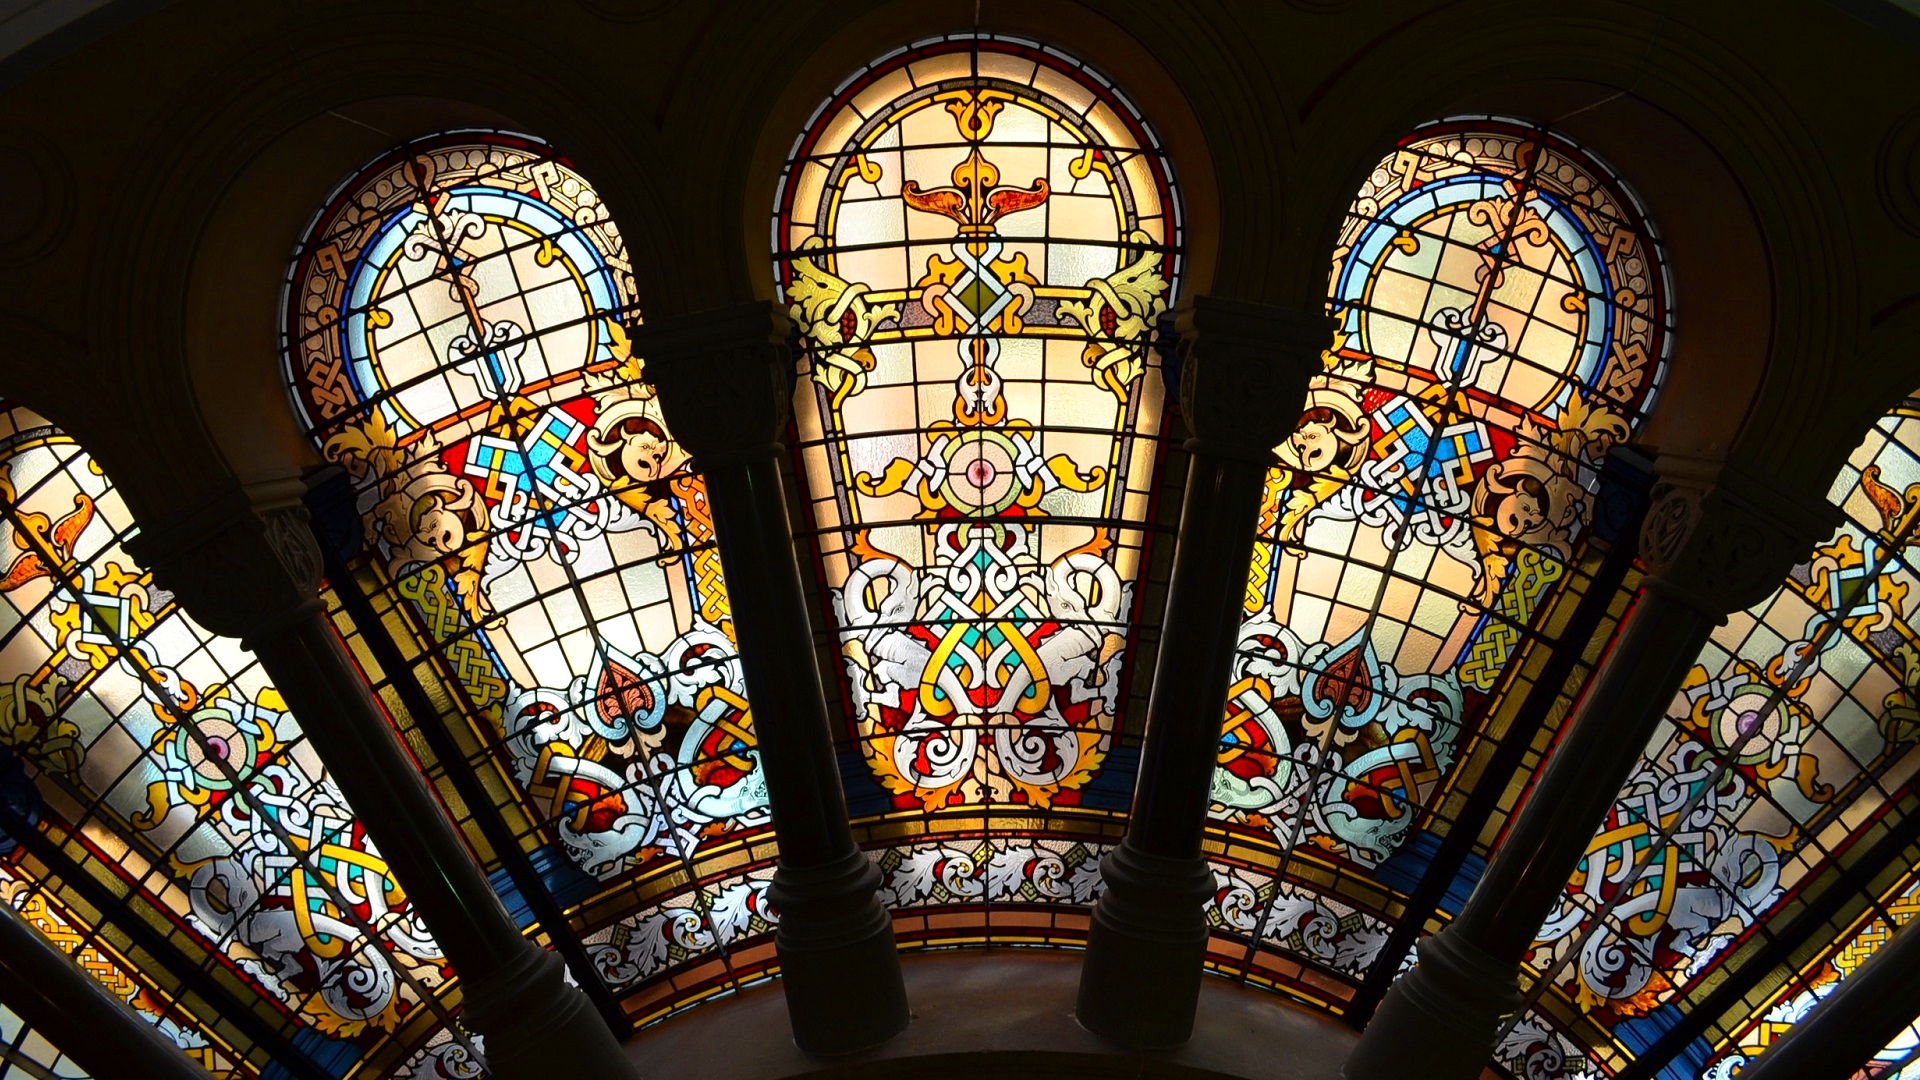 stained glass wallpaper,stained glass,glass,architecture,window,place of worship